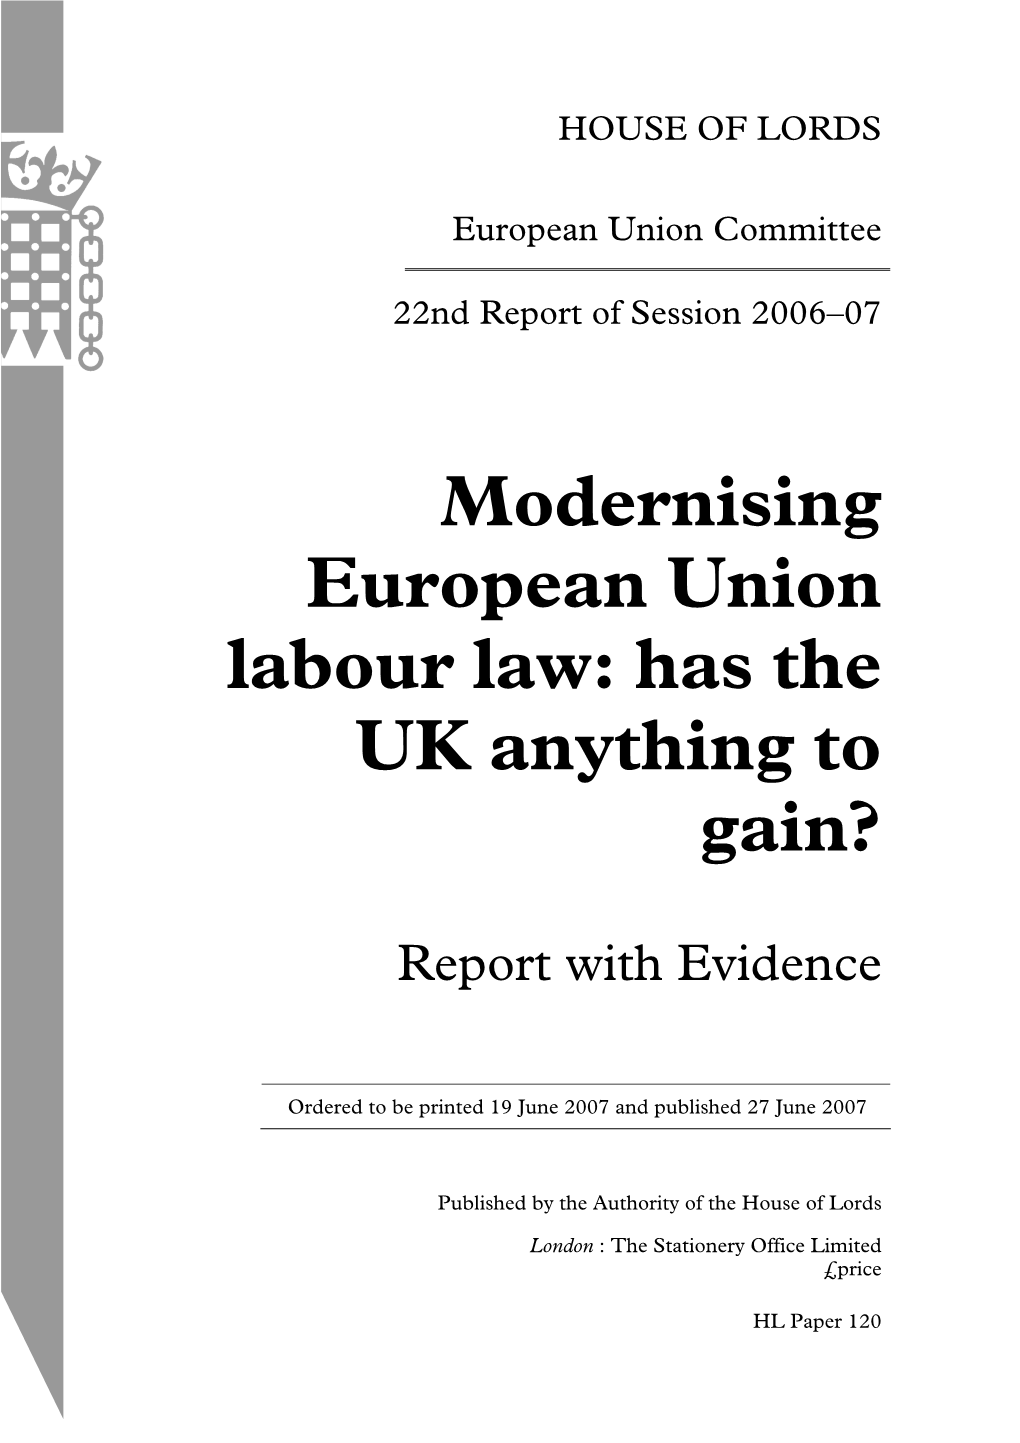 Modernising European Union Labour Law: Has the UK Anything to Gain?